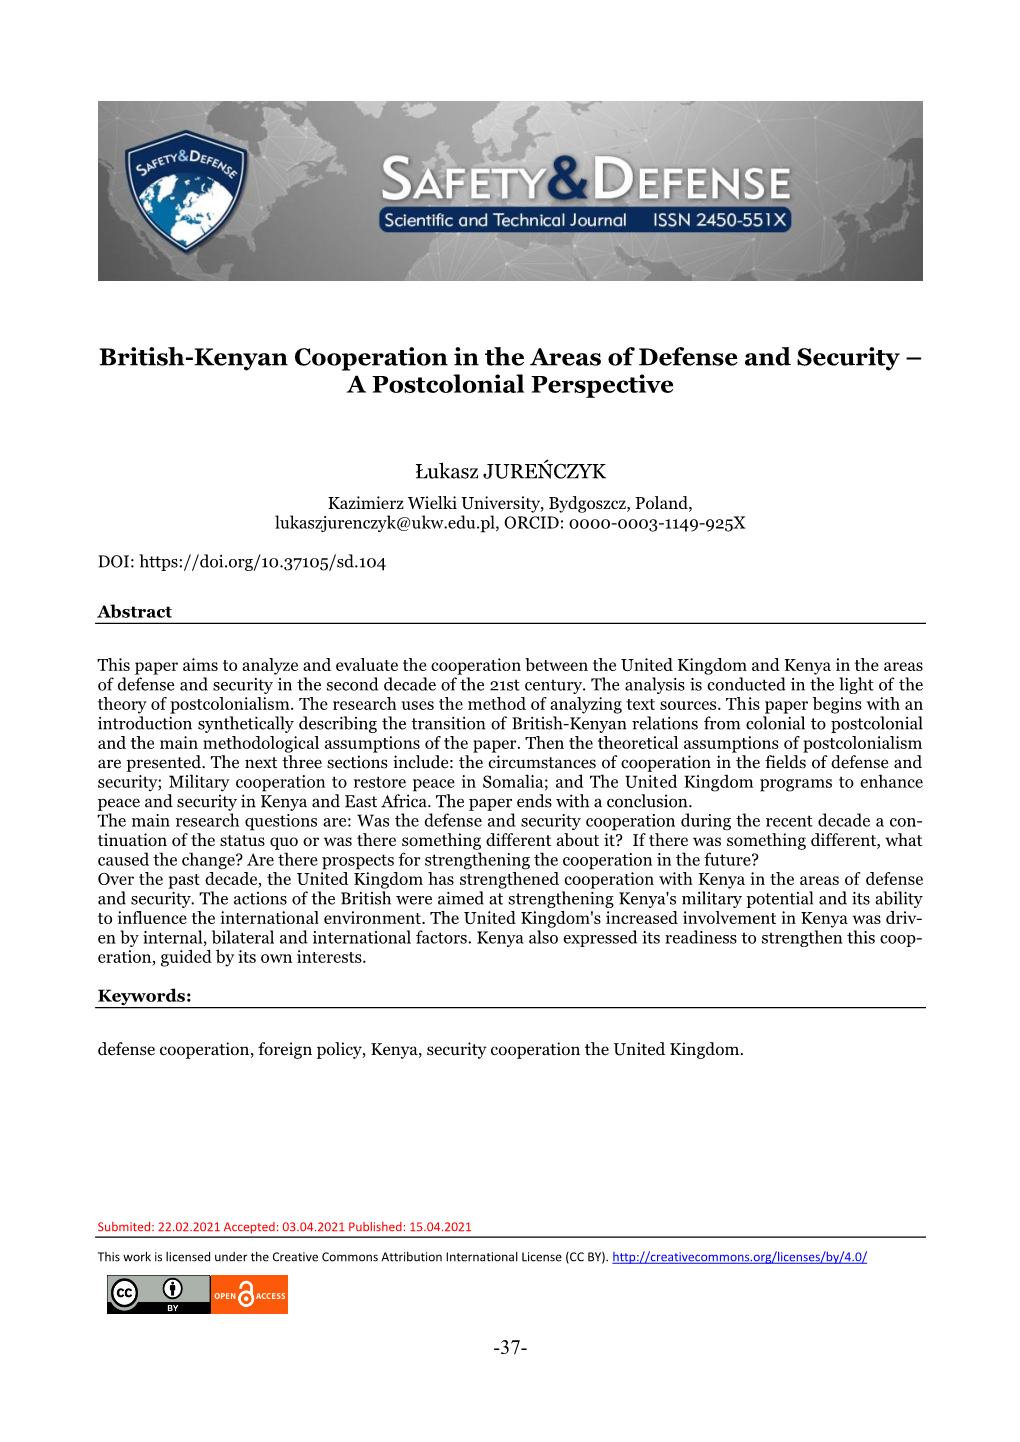 British-Kenyan Cooperation in the Areas of Defense and Security – 2 a Postcolonial Perspective